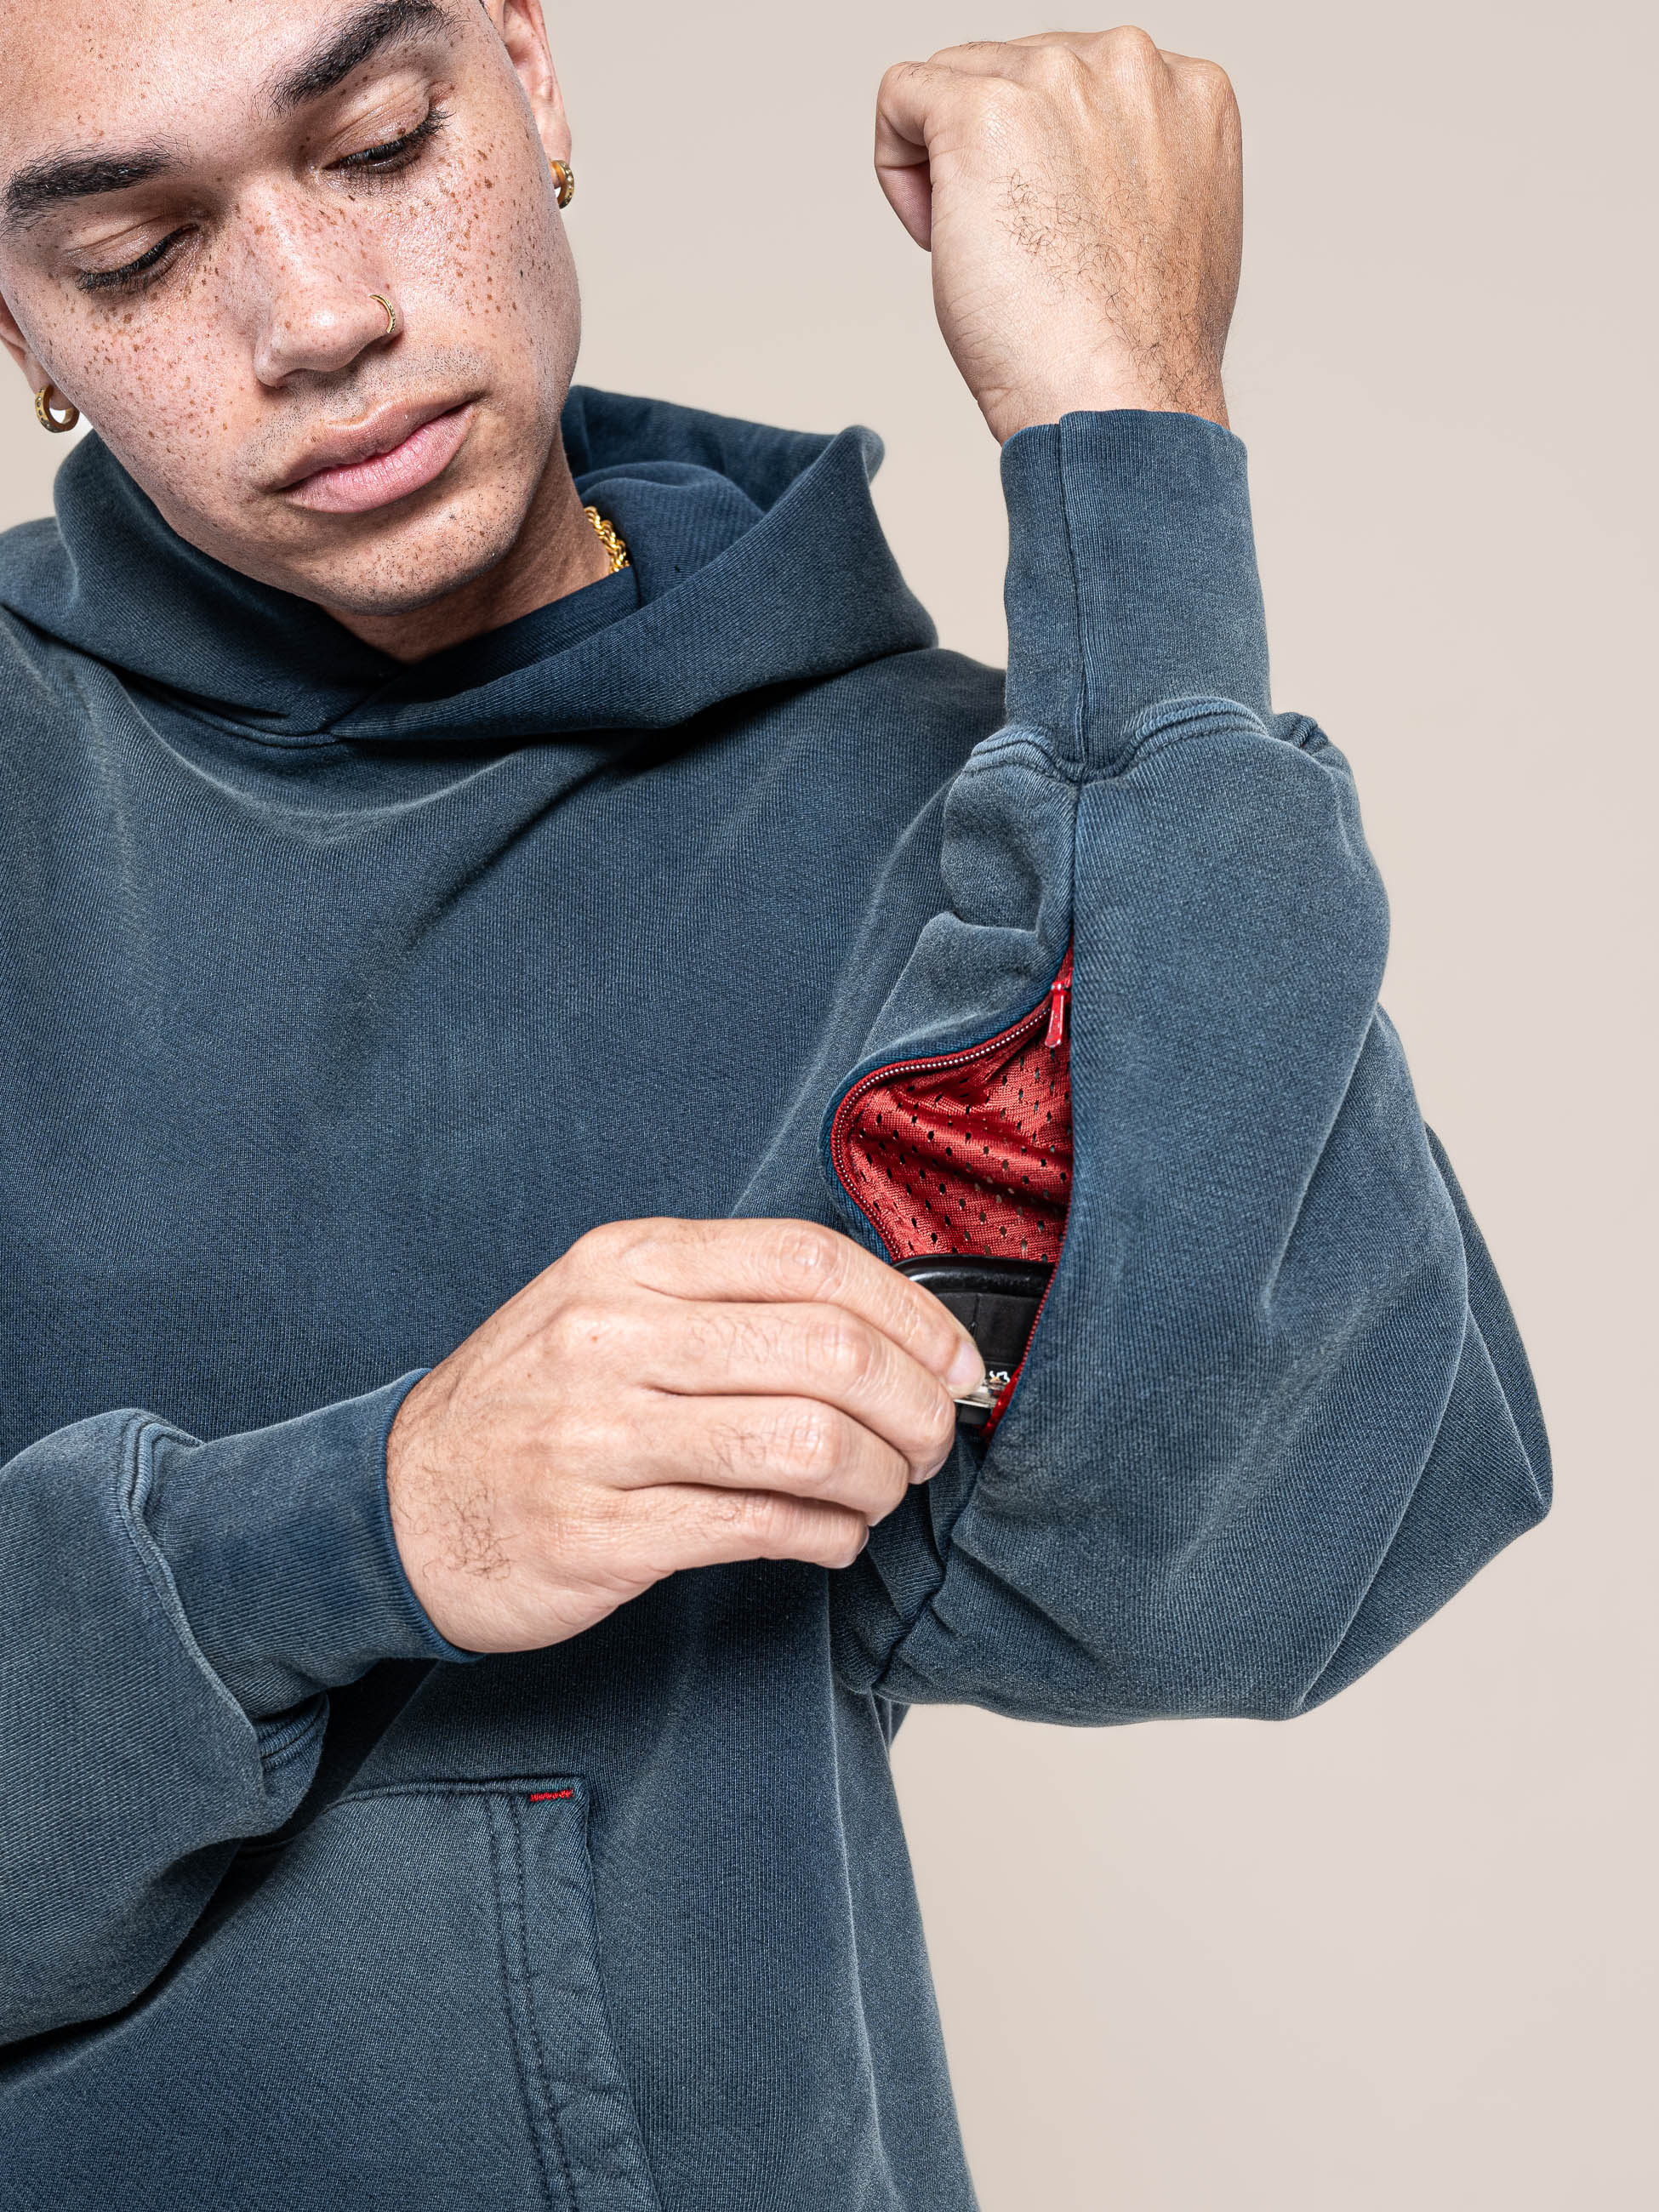 male model puts his key inside of the hidden pocket at the left arm